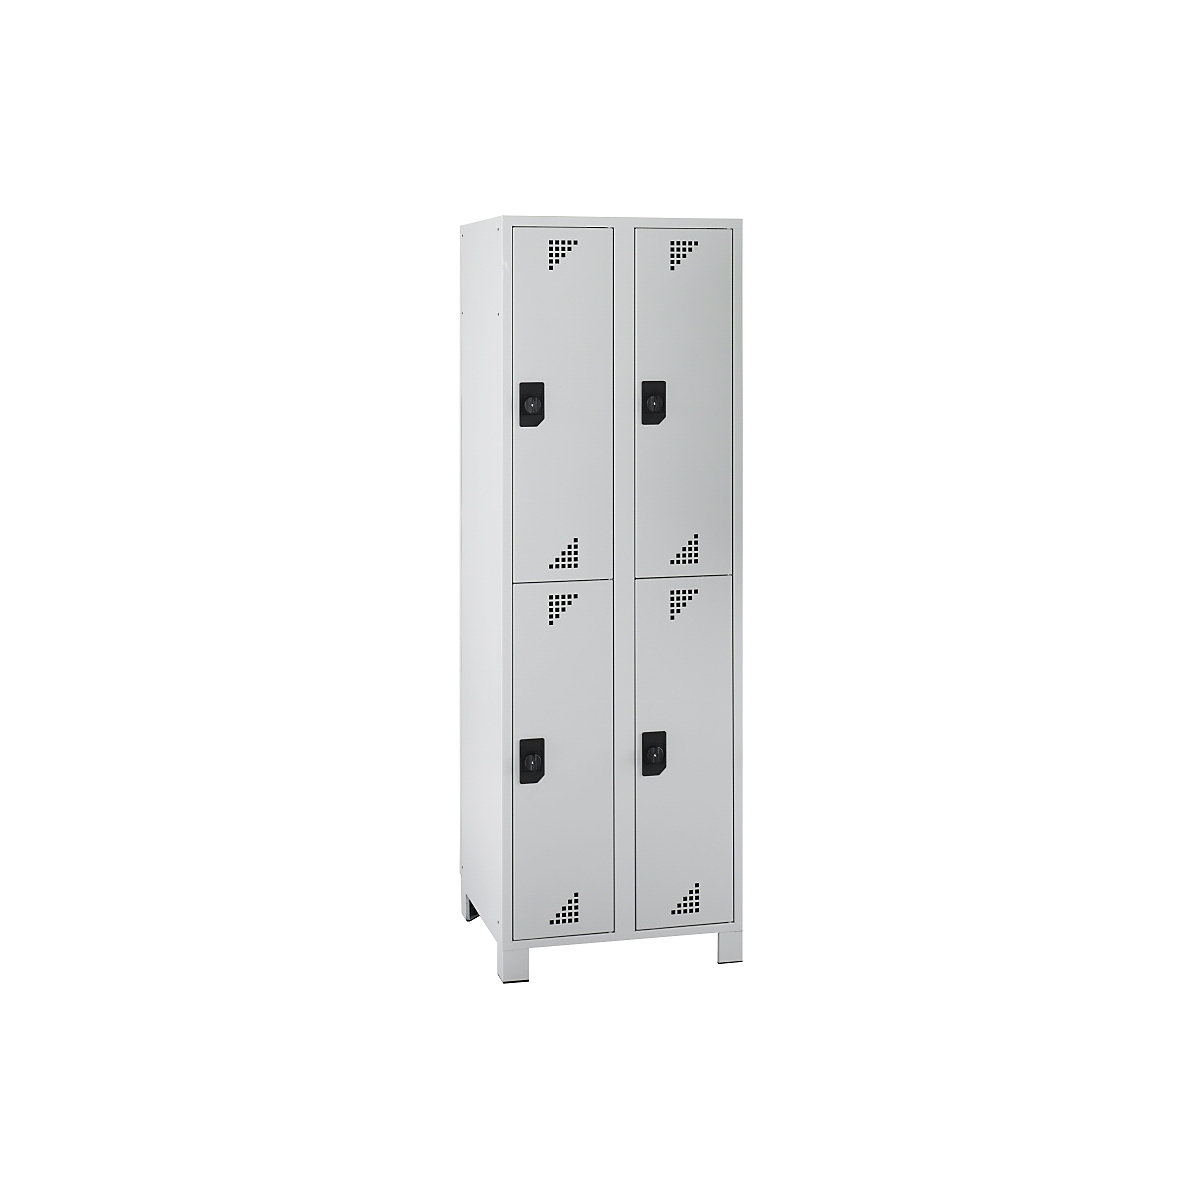 Cloakroom locker with half-height compartments - eurokraft pro